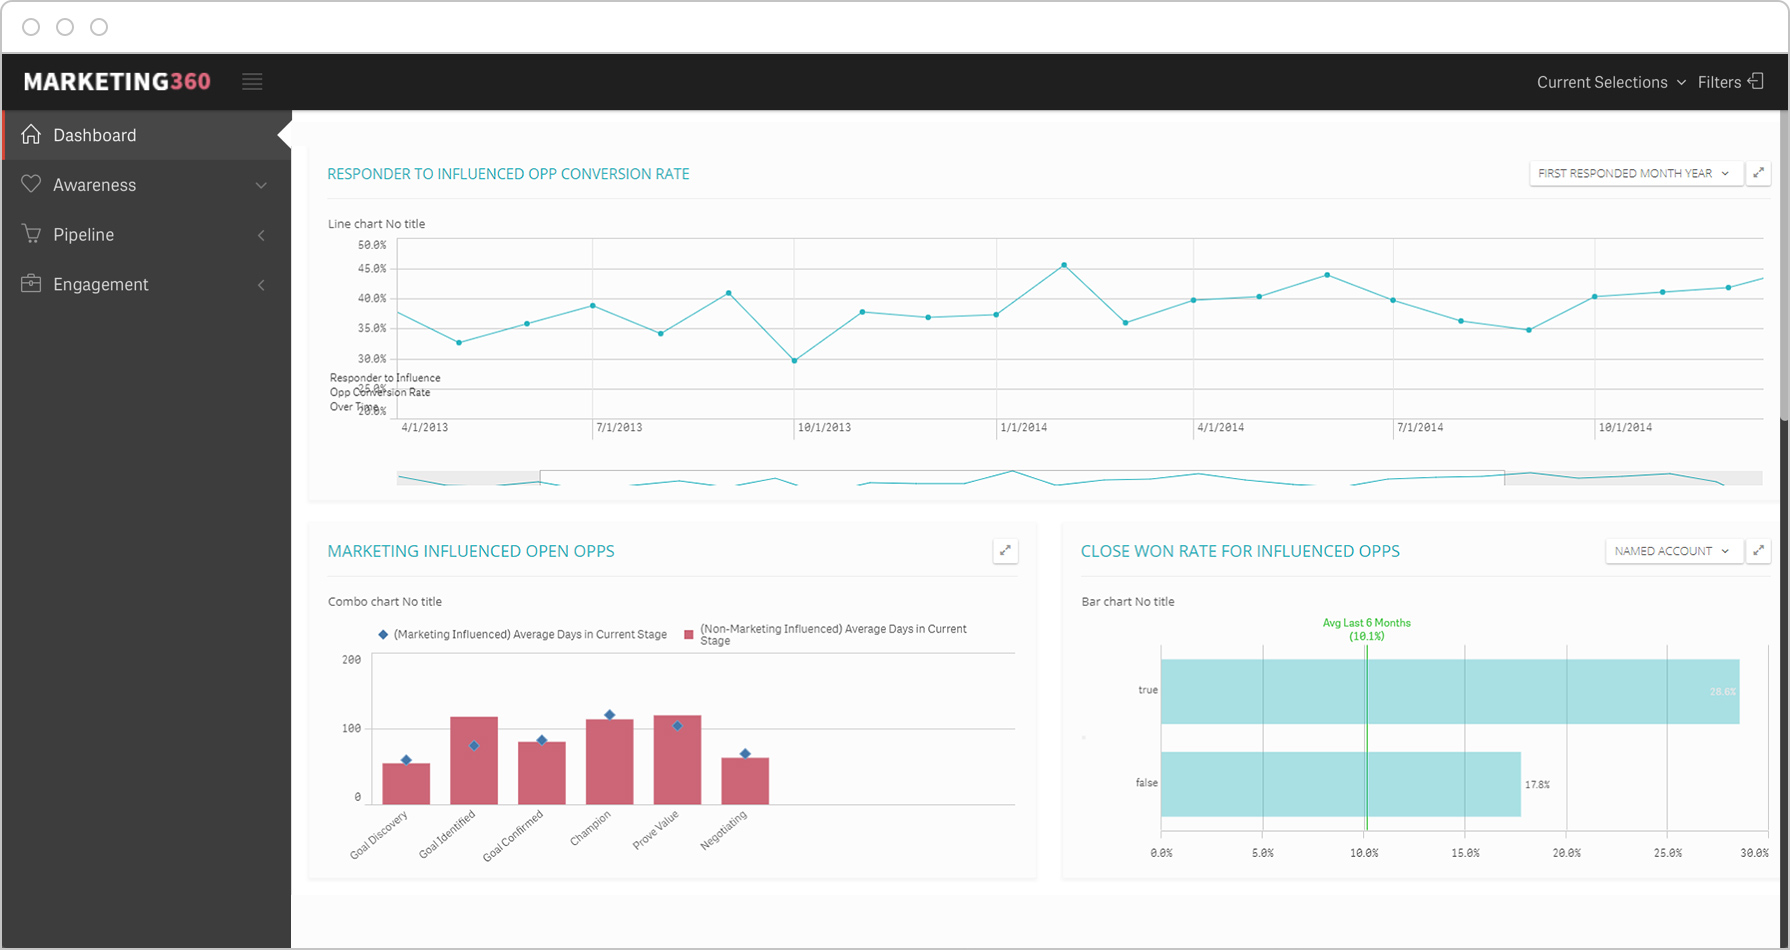 Pipeline dashboard integrates data from marketing and CRM systems to analyze activities based on marketing-influenced opportunities.